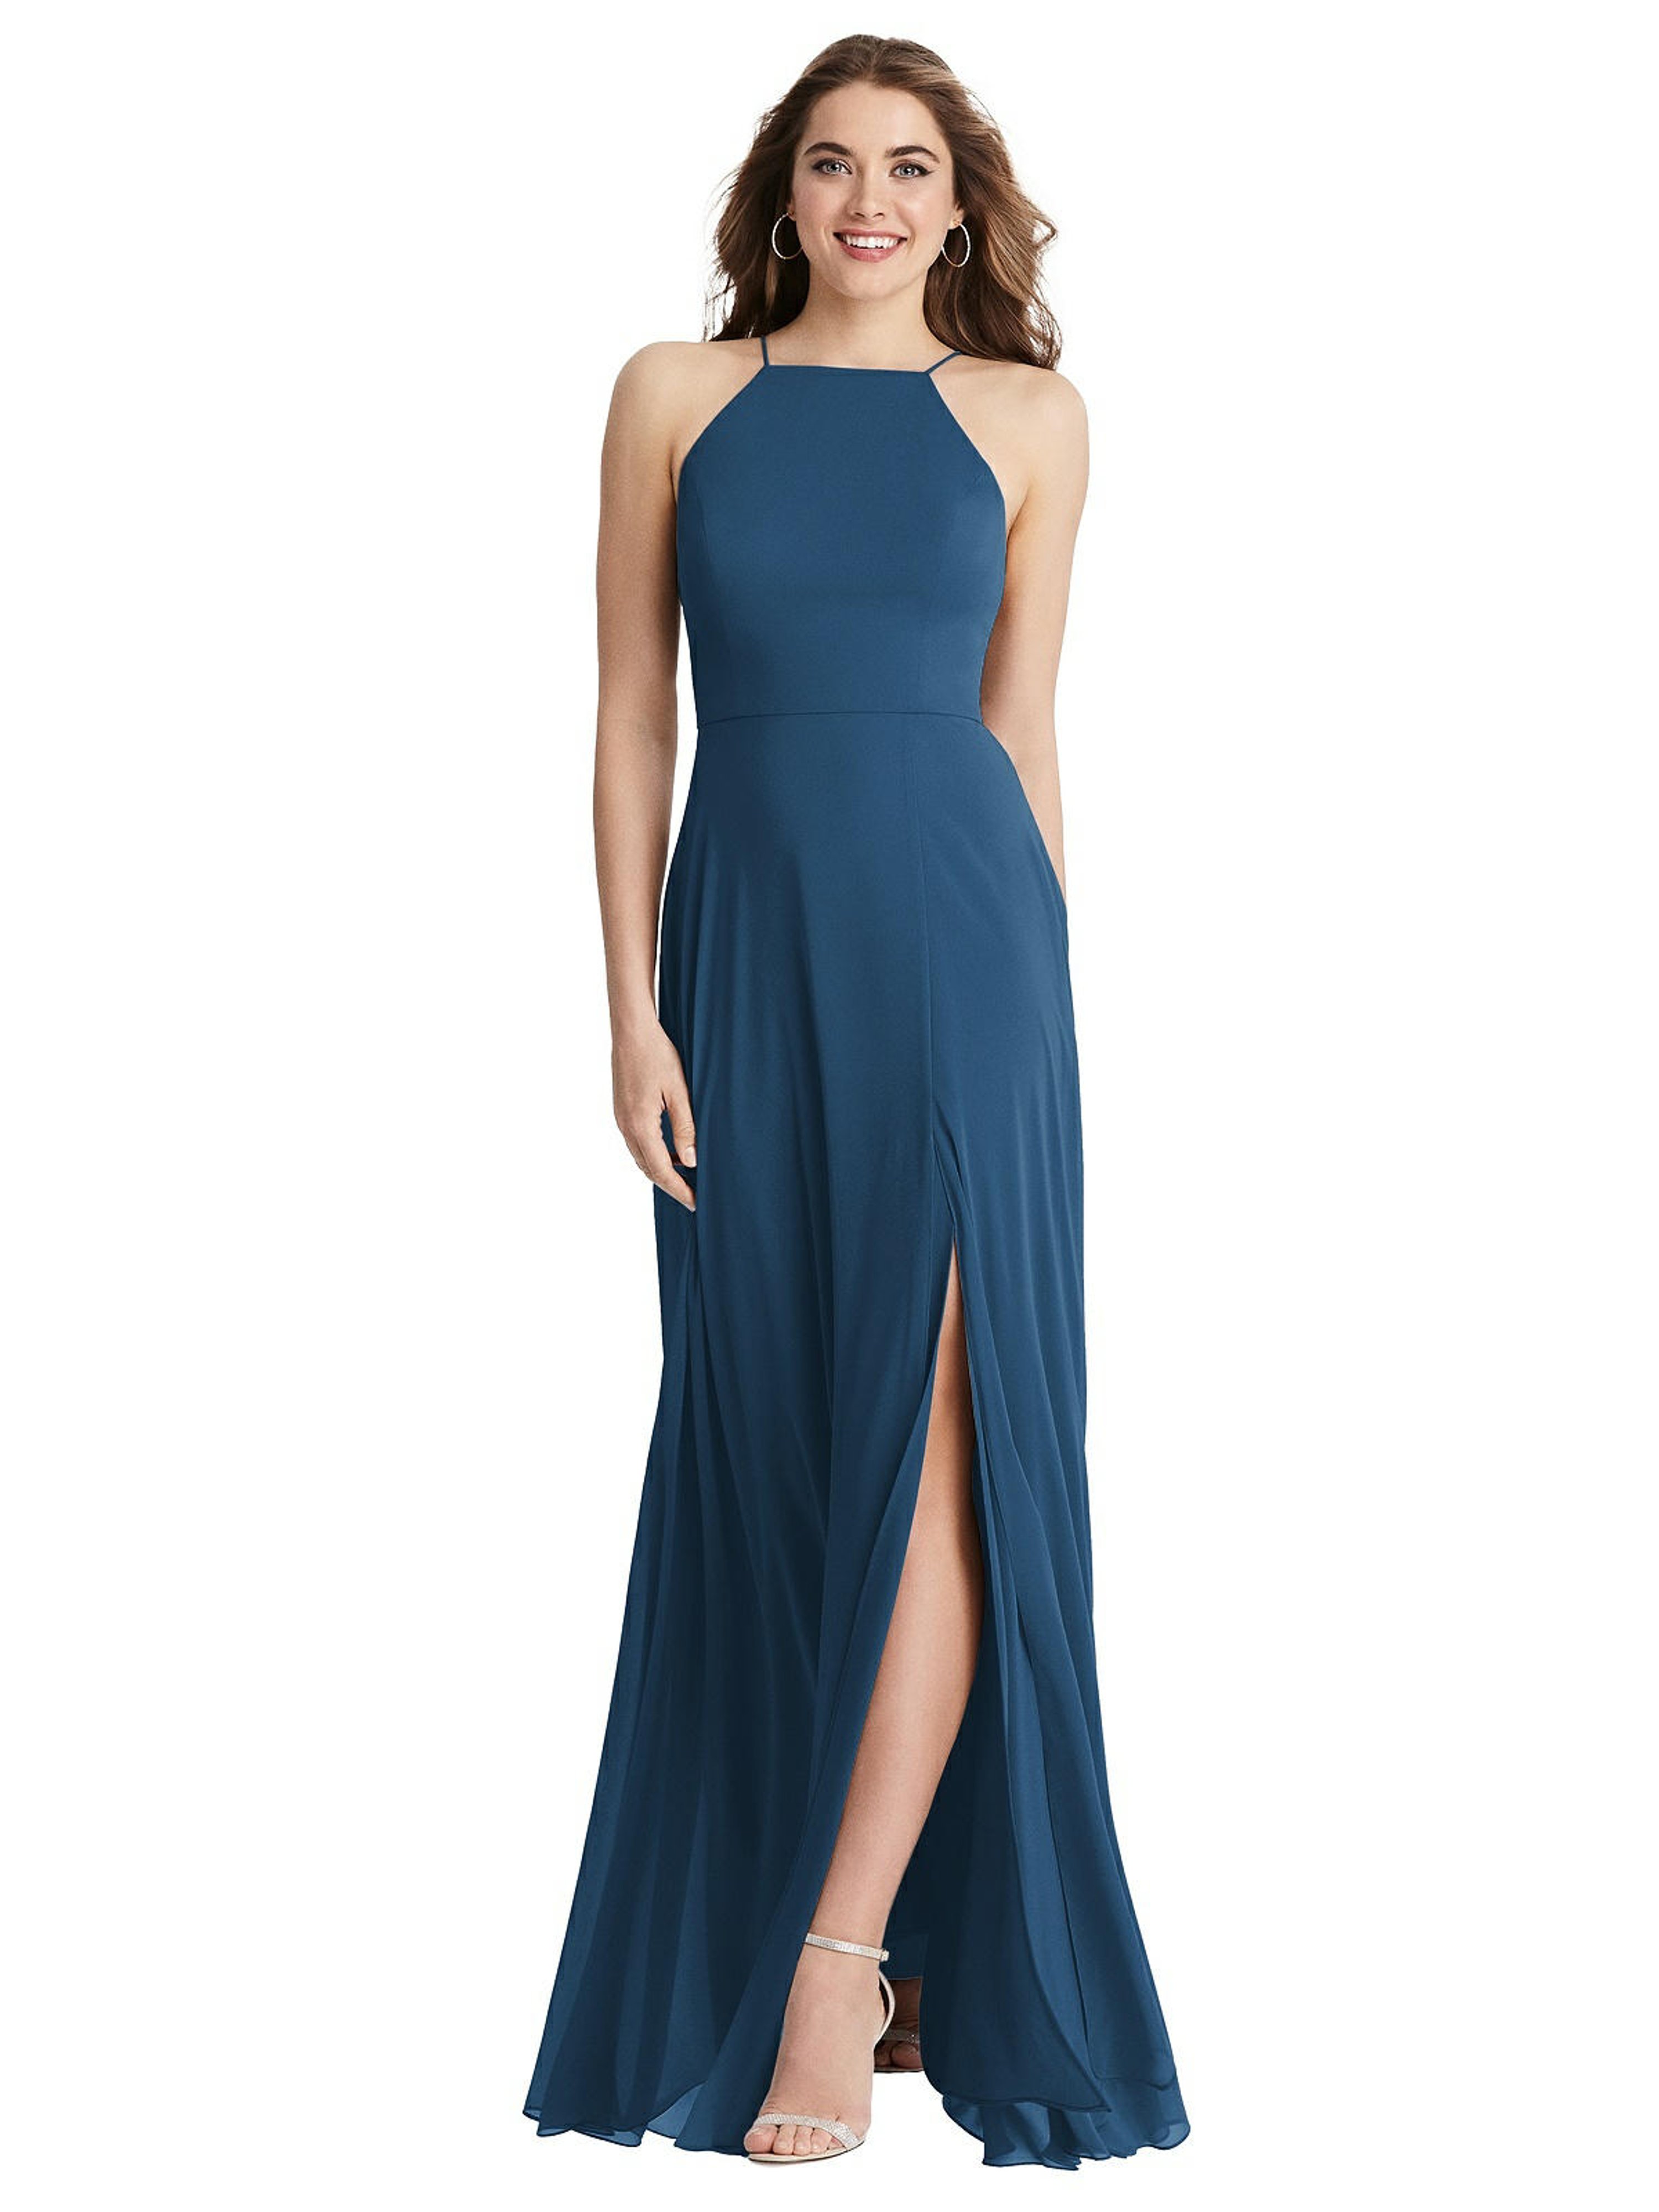 LOVELY LOVELY HIGH NECK CHIFFON MAXI DRESS WITH FRONT SLIT